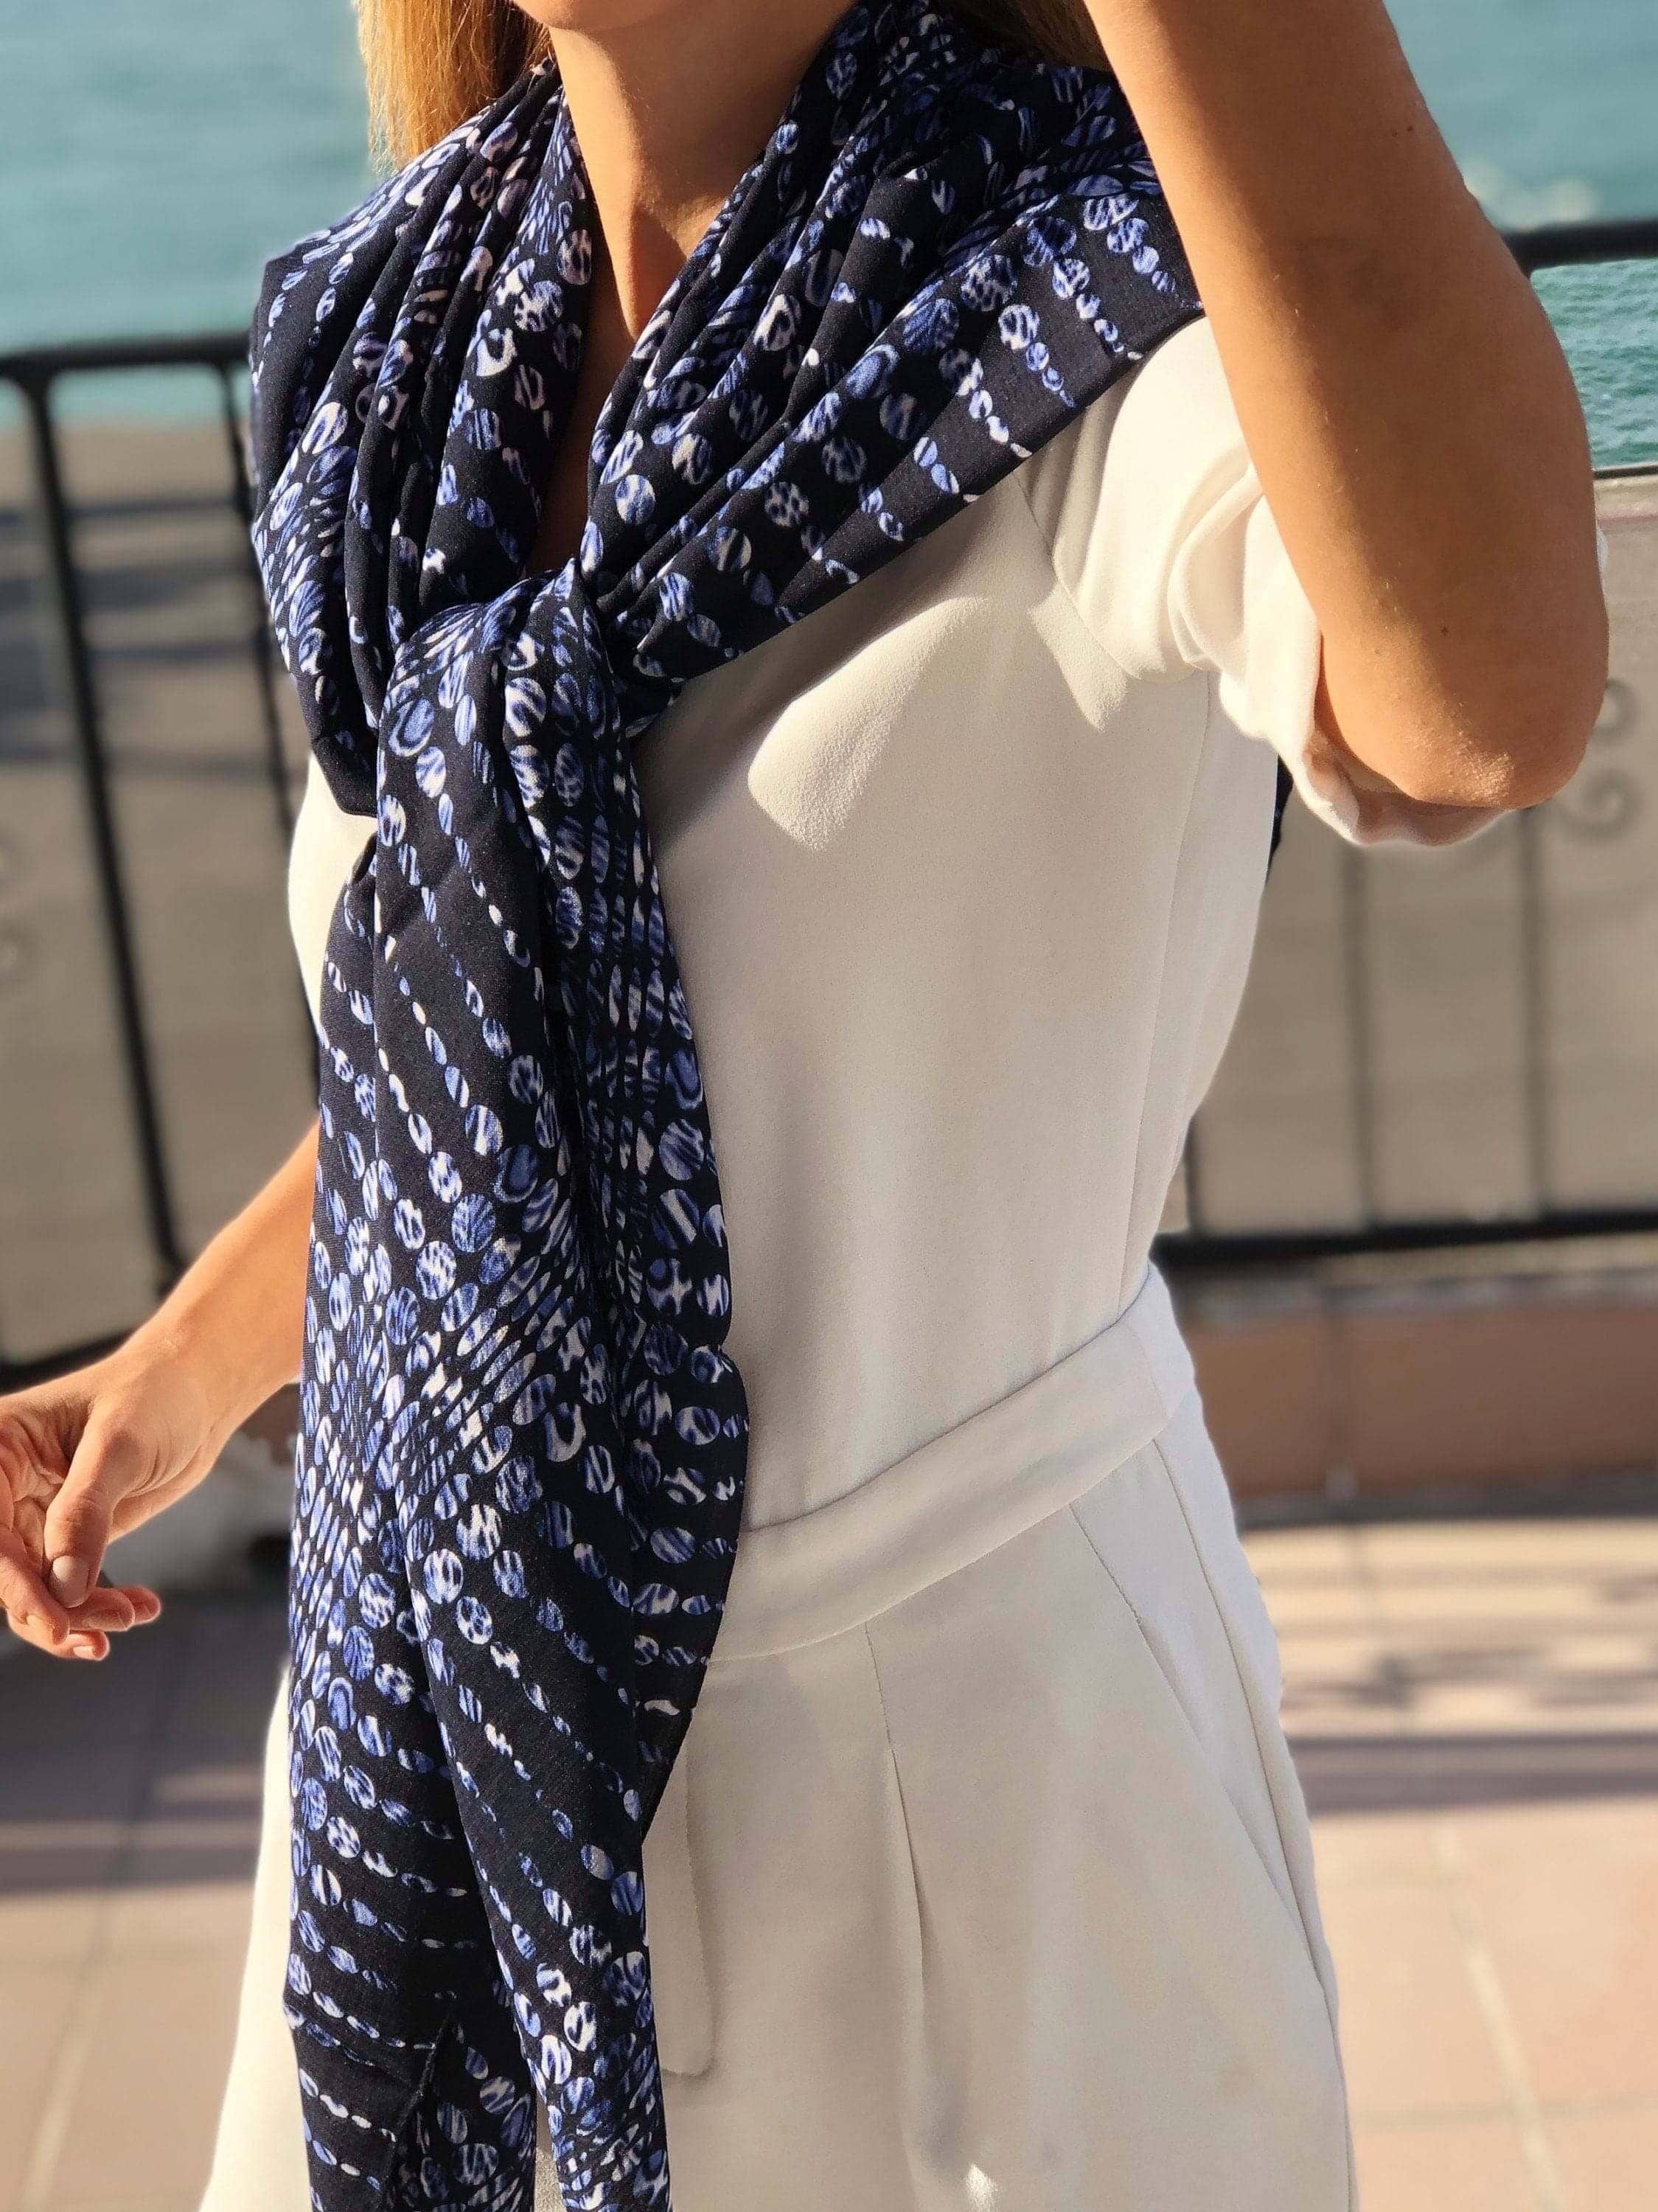 Stylish Dark Blue White Cotton Scarf - A versatile accessory that can be worn with a variety of outfits.